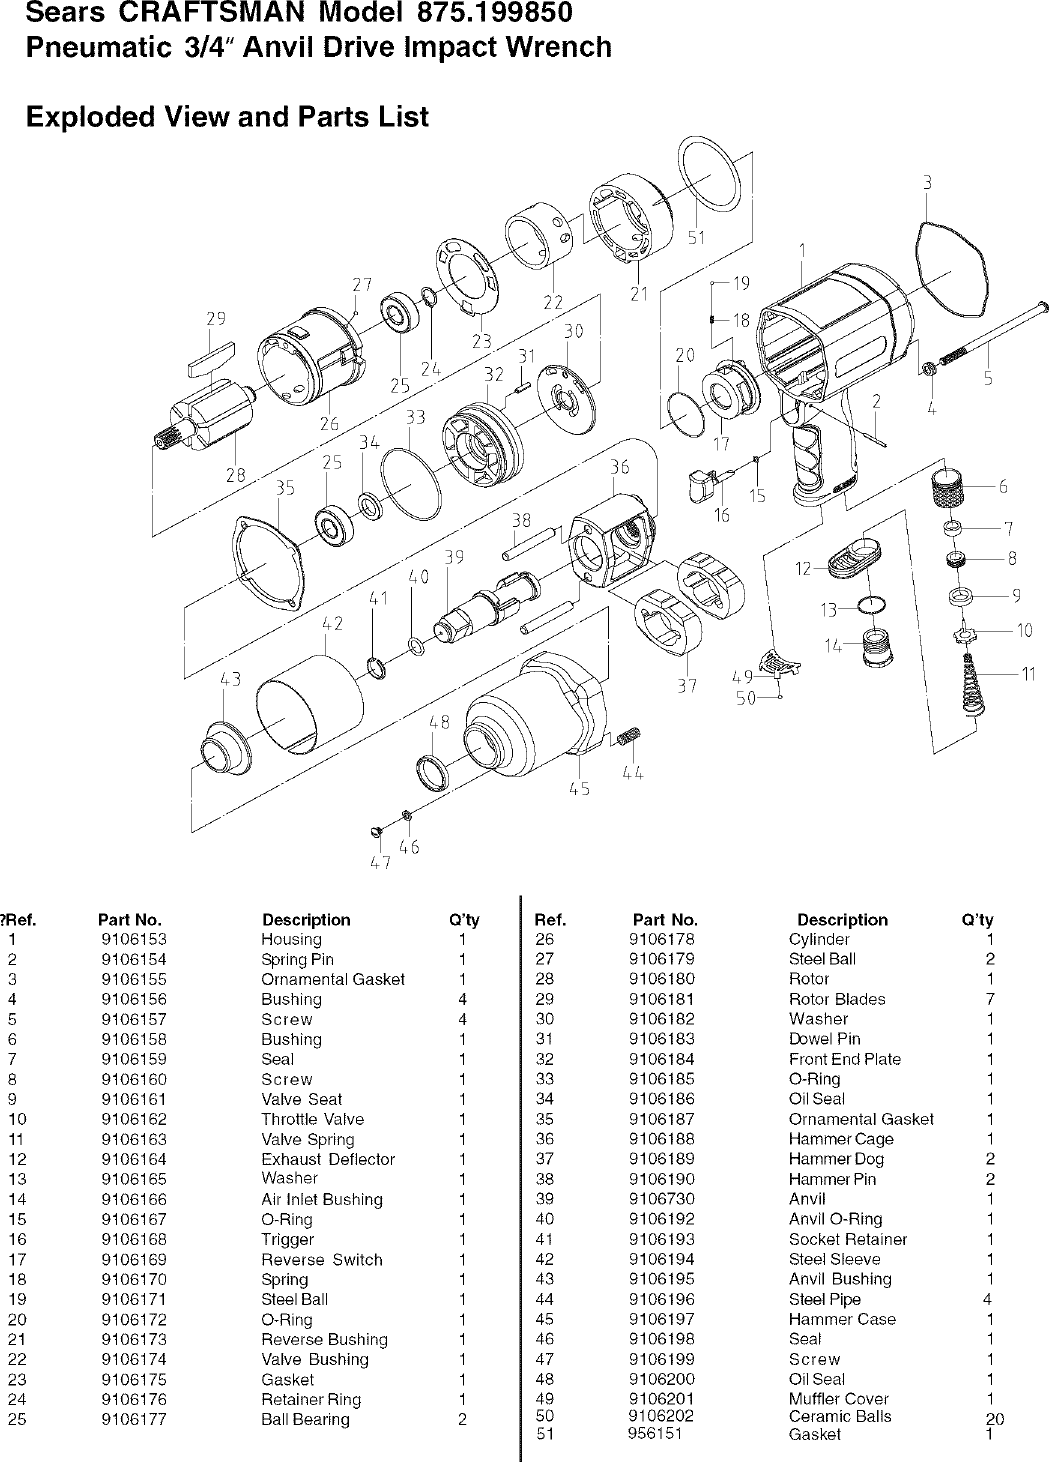 Page 4 of 11 - Craftsman 875199850 User Manual  IMPACT WRENCH - Manuals And Guides L0801177